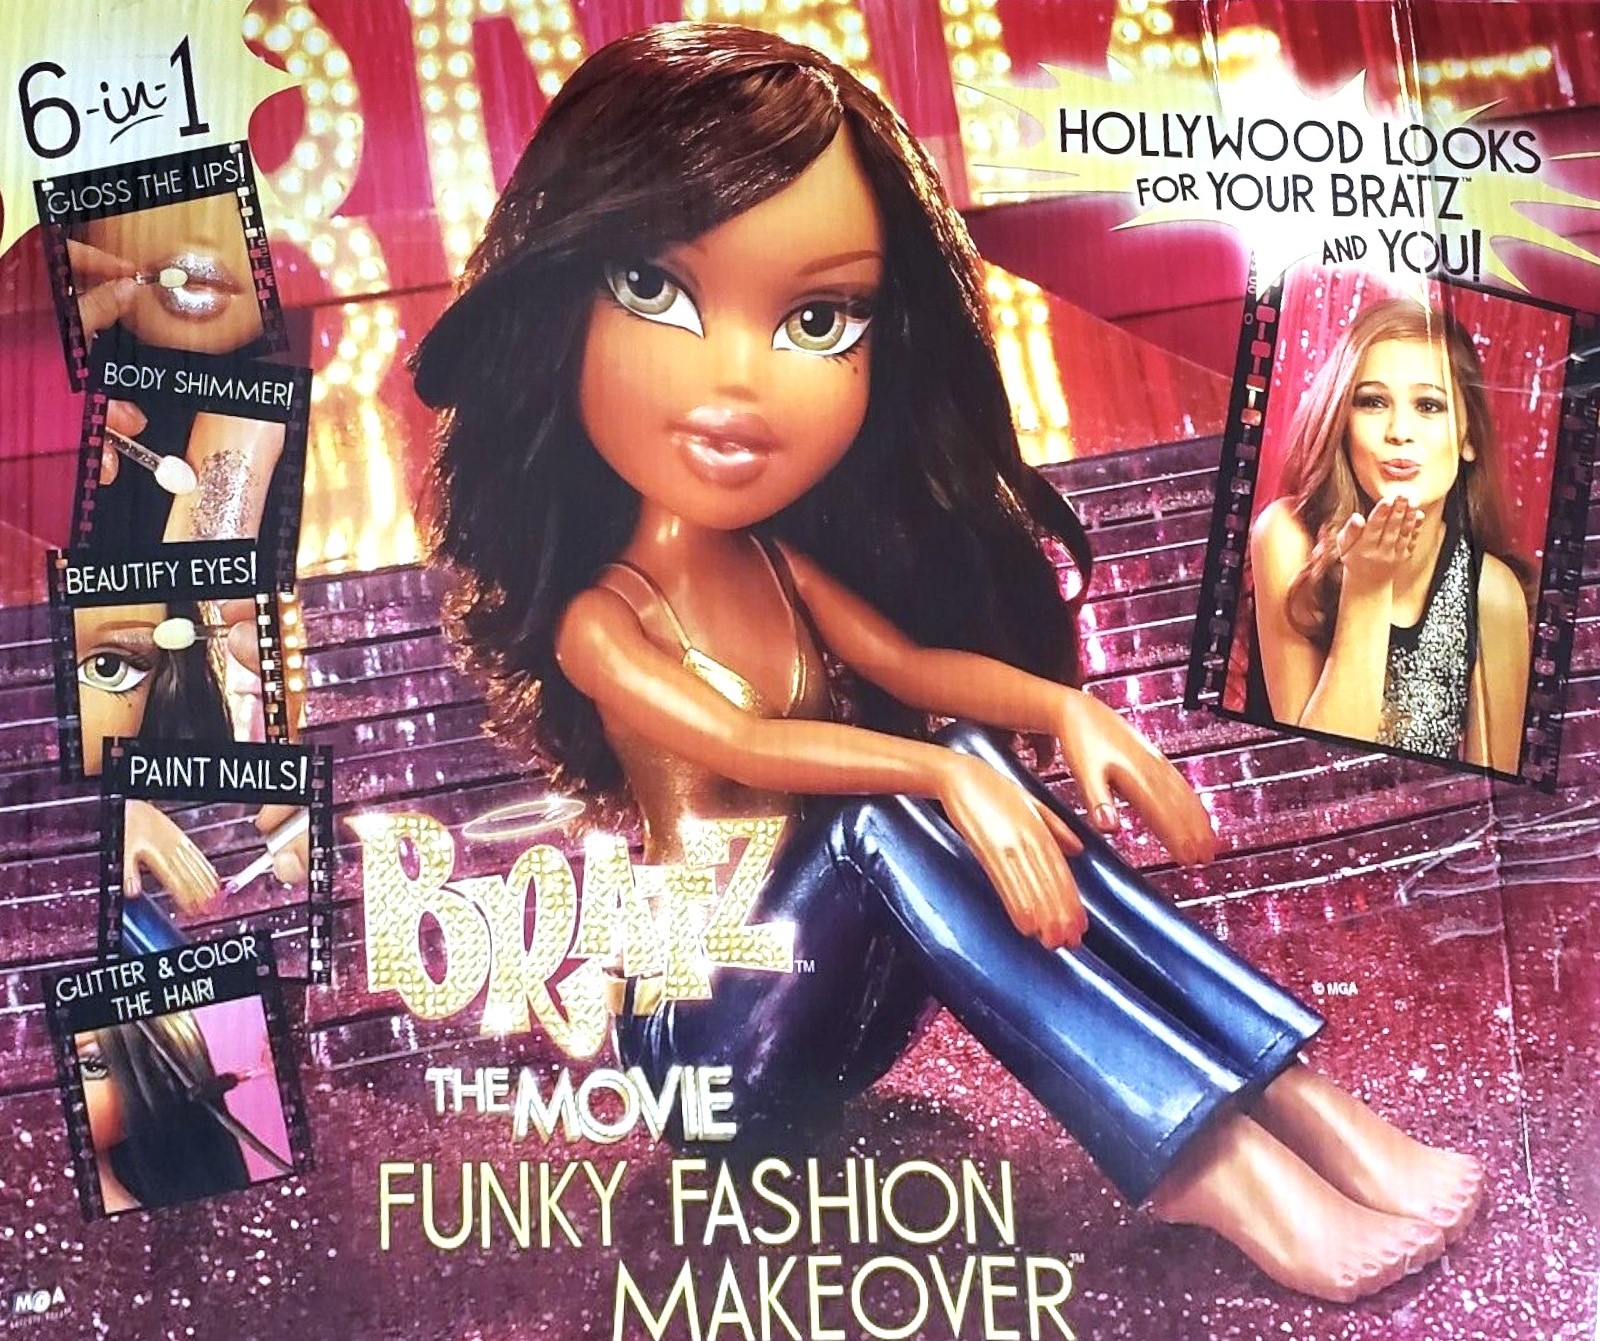 https://static.wikia.nocookie.net/bratzfan/images/1/19/The_Movie_%28Funky_Fashion_Makeover%29.jpg/revision/latest?cb=20230219114844